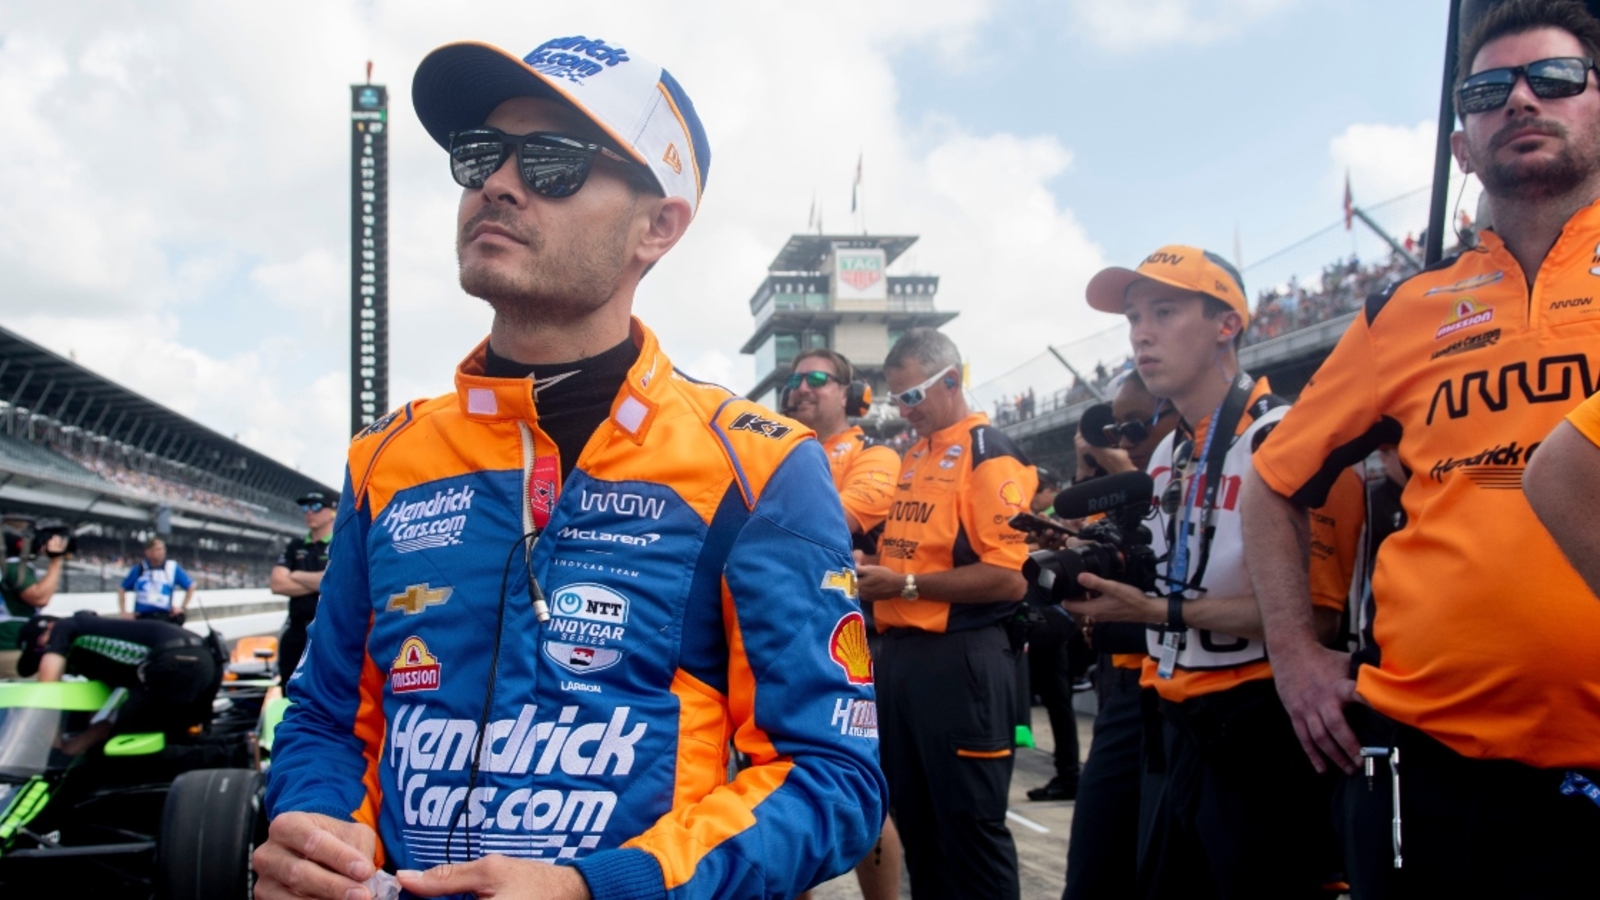 Kyle Larson qualifies P5 for the Indy 500, leaves for NASCAR All-Star Race